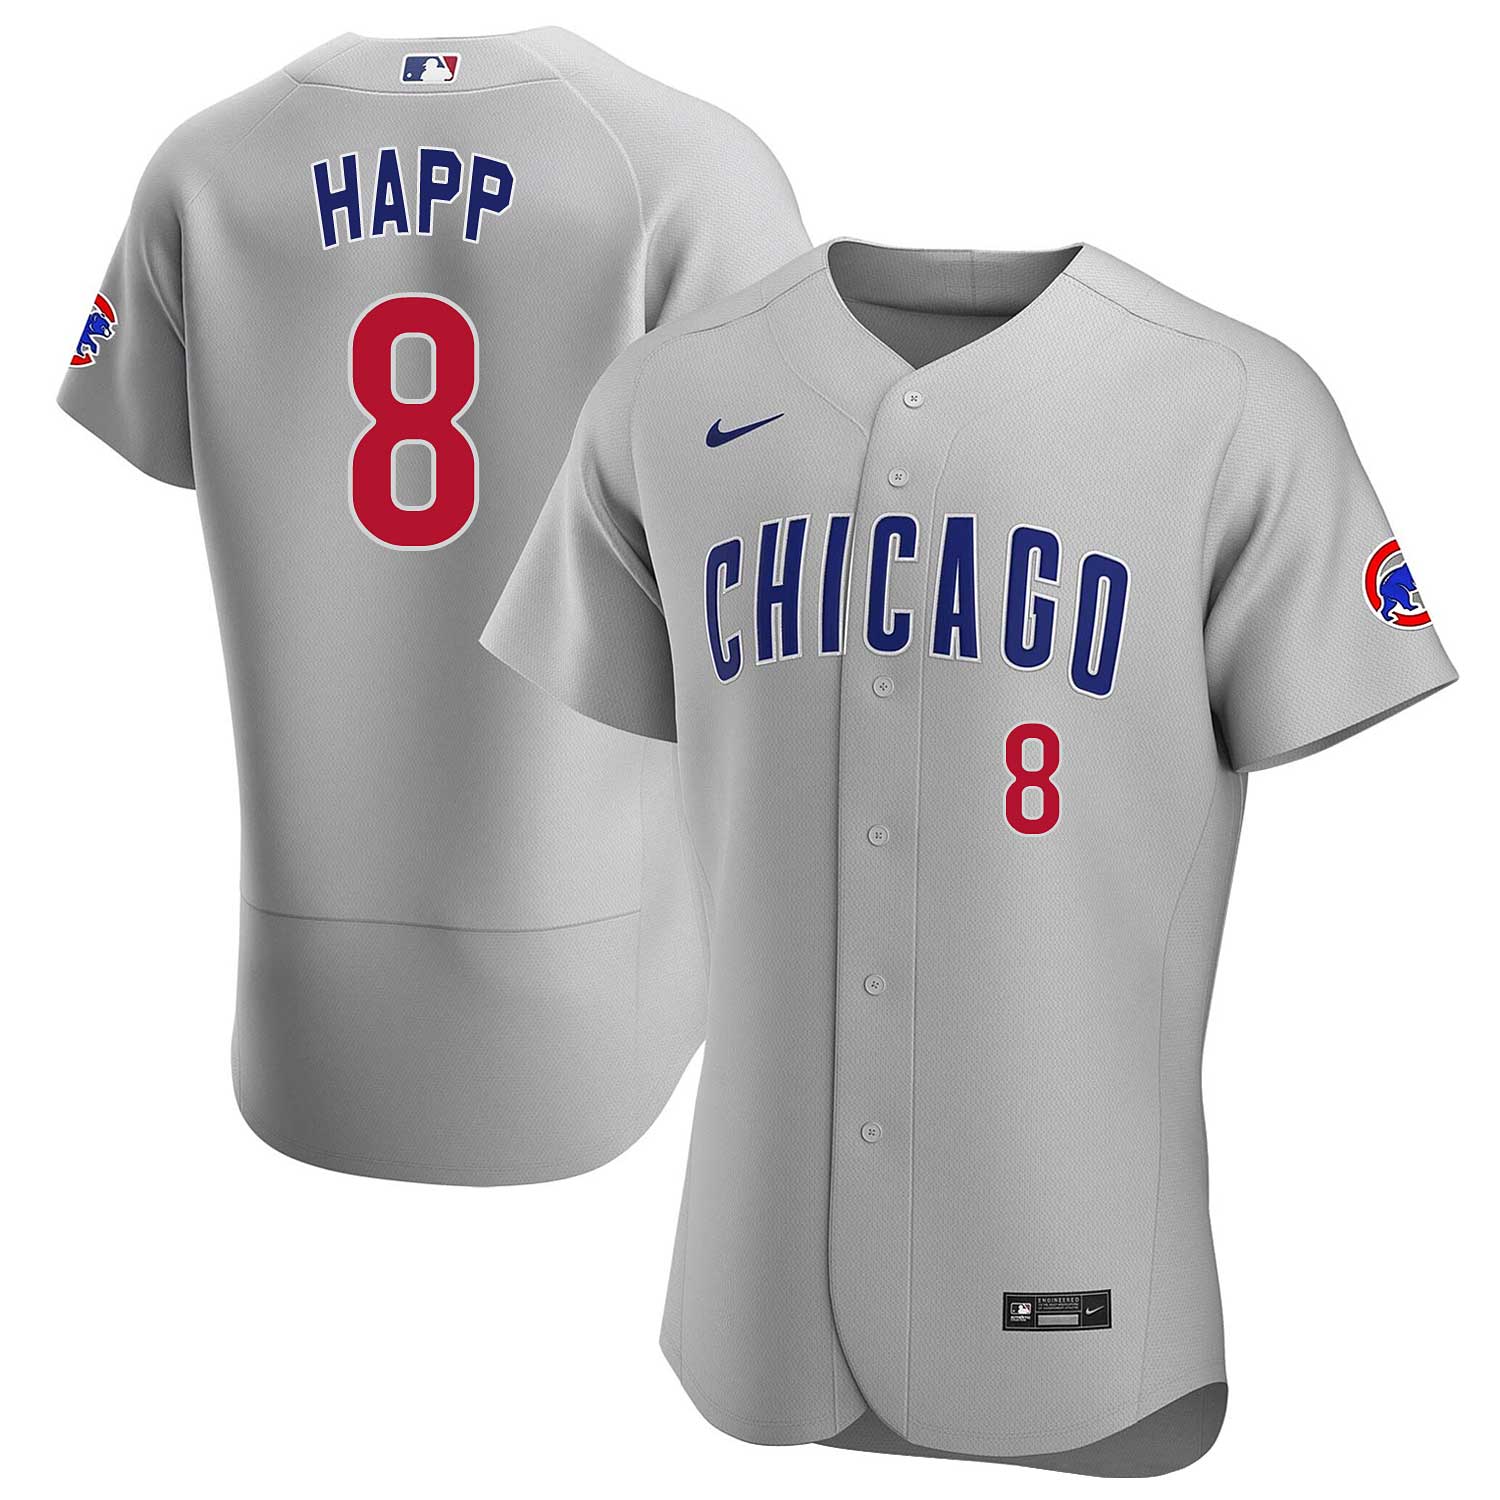 Chicago Cubs Apparel, Chicago Cubs Jerseys, Chicago Cubs Gear